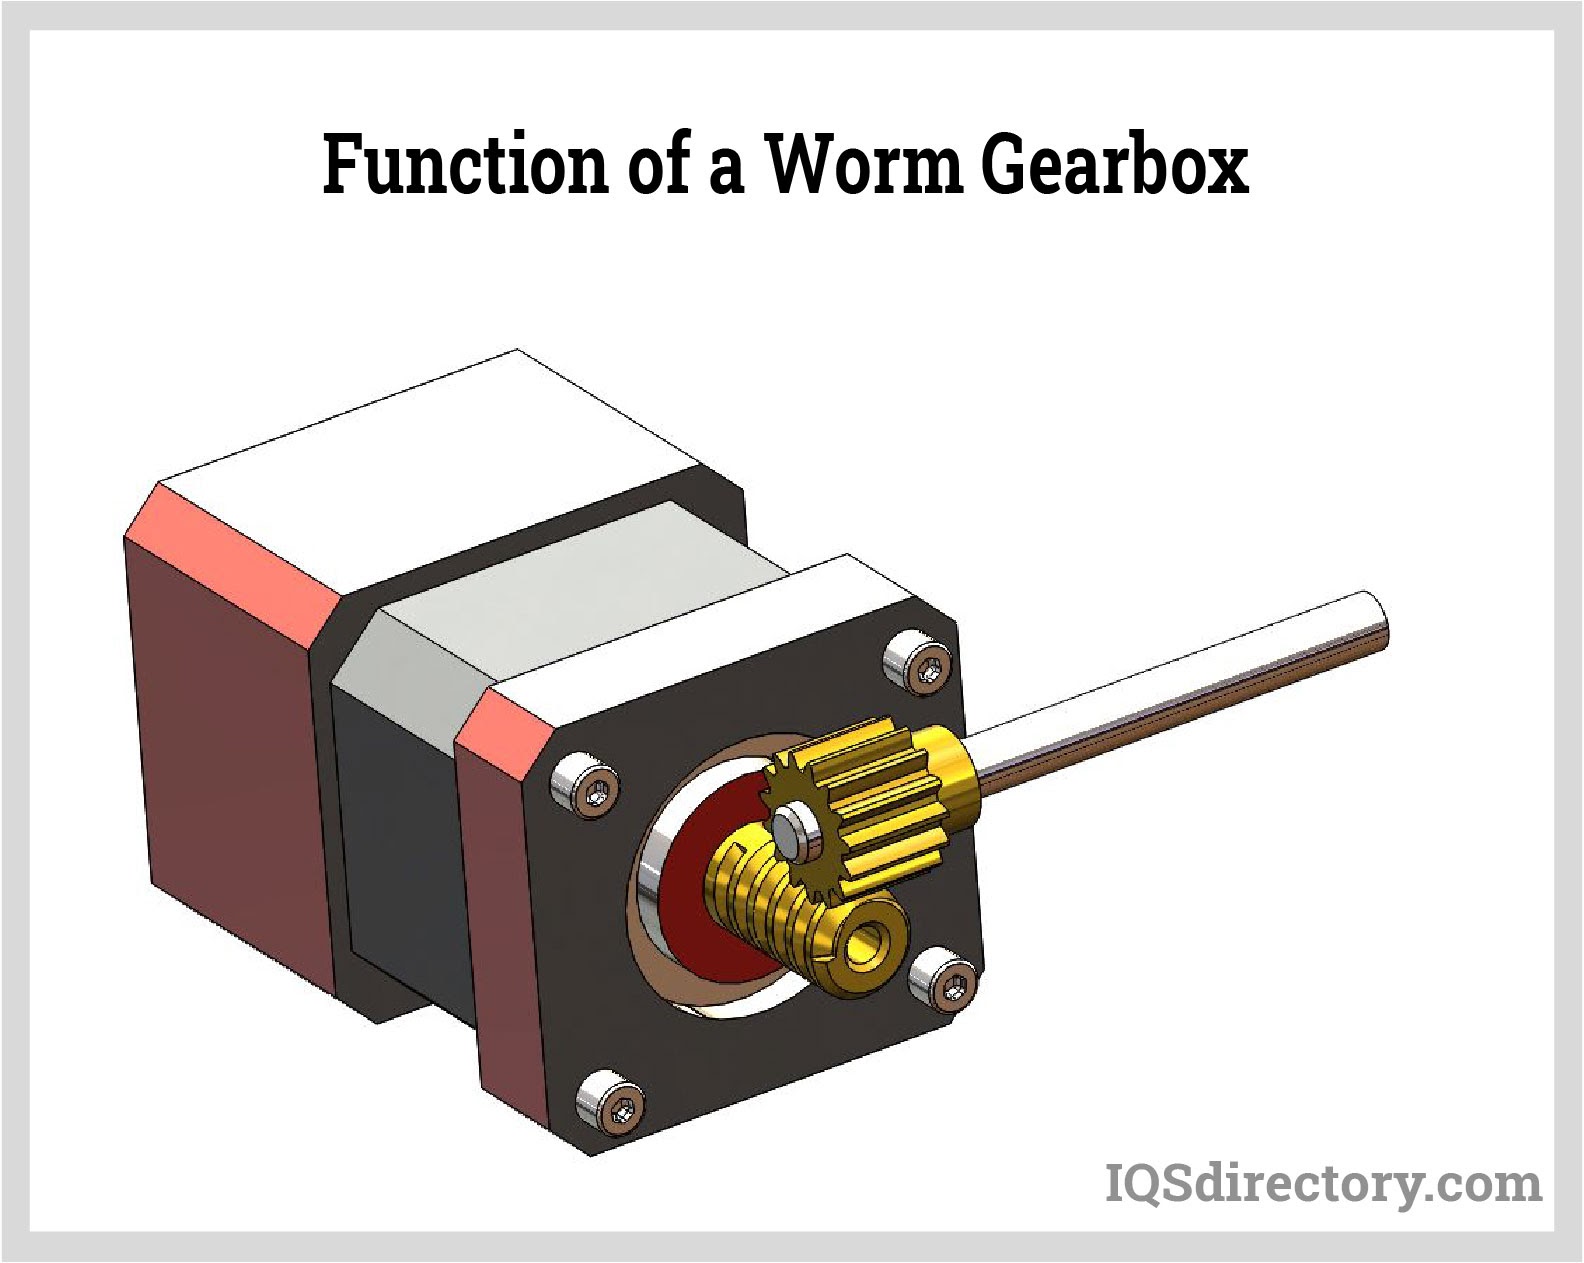 Function of a Worm Gearbox